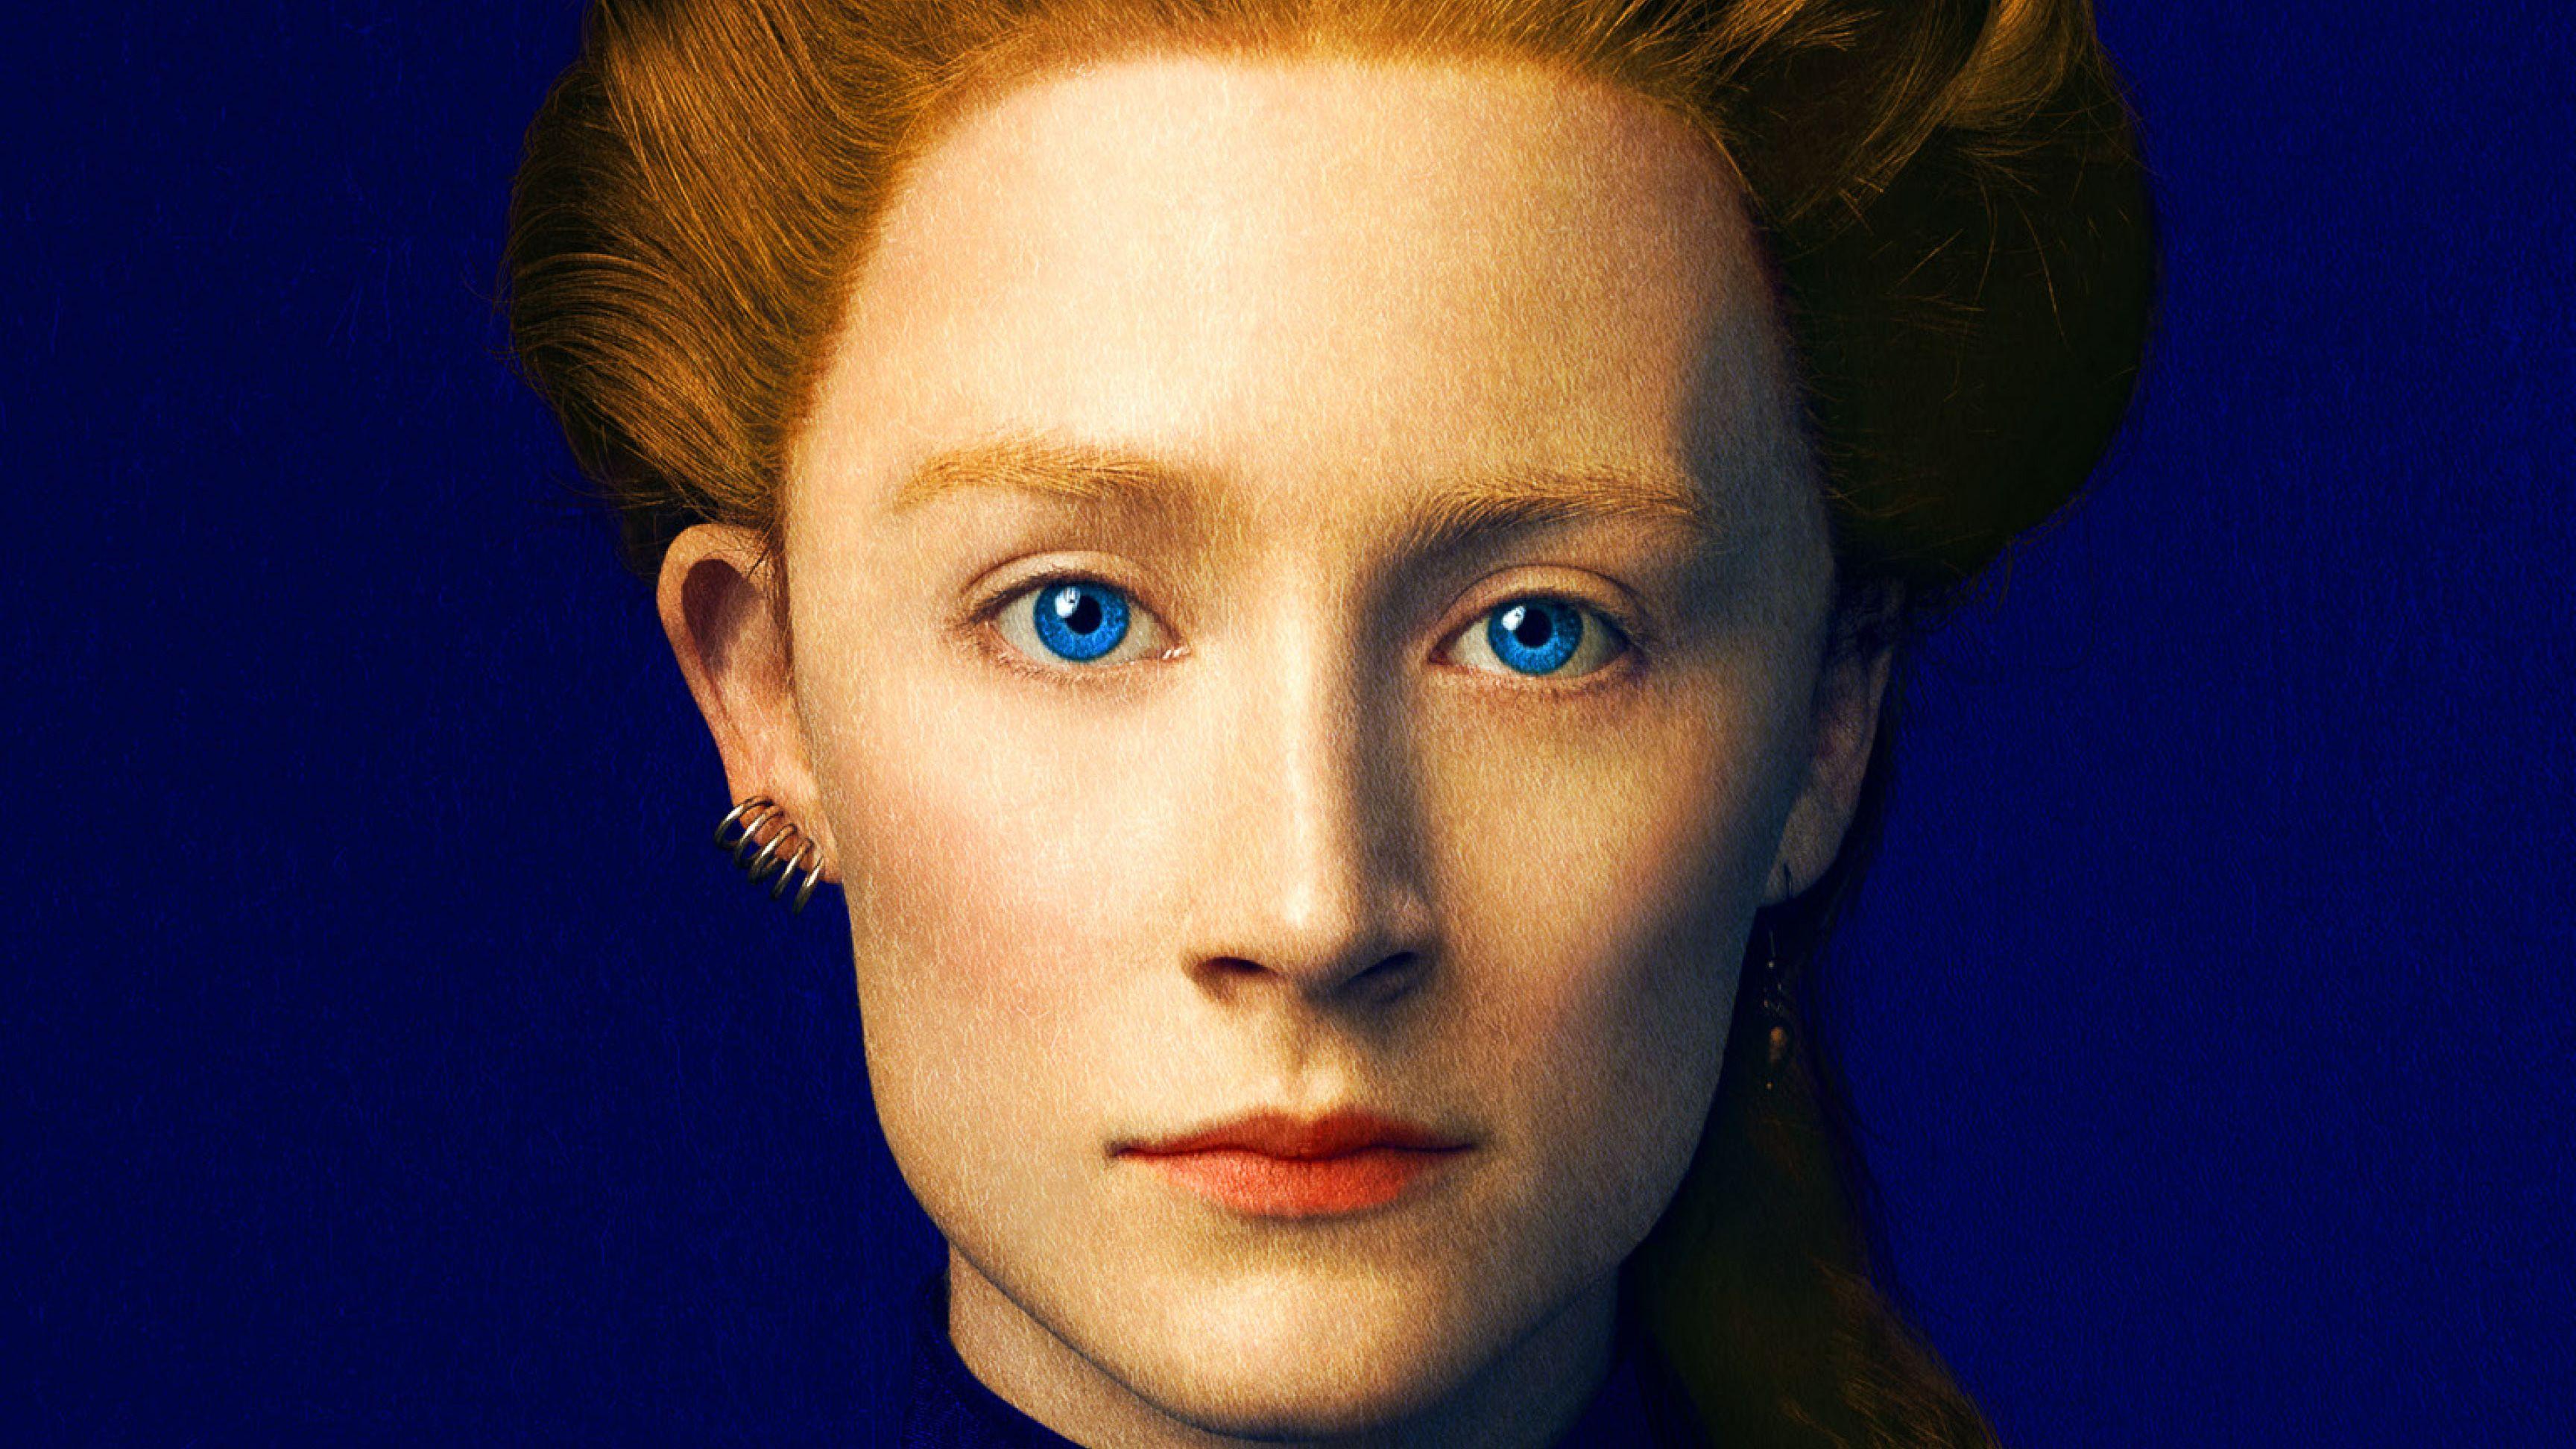 Saoirse Ronan As Mary In Mary Queen Of Scots Movie, HD Movies, 4k